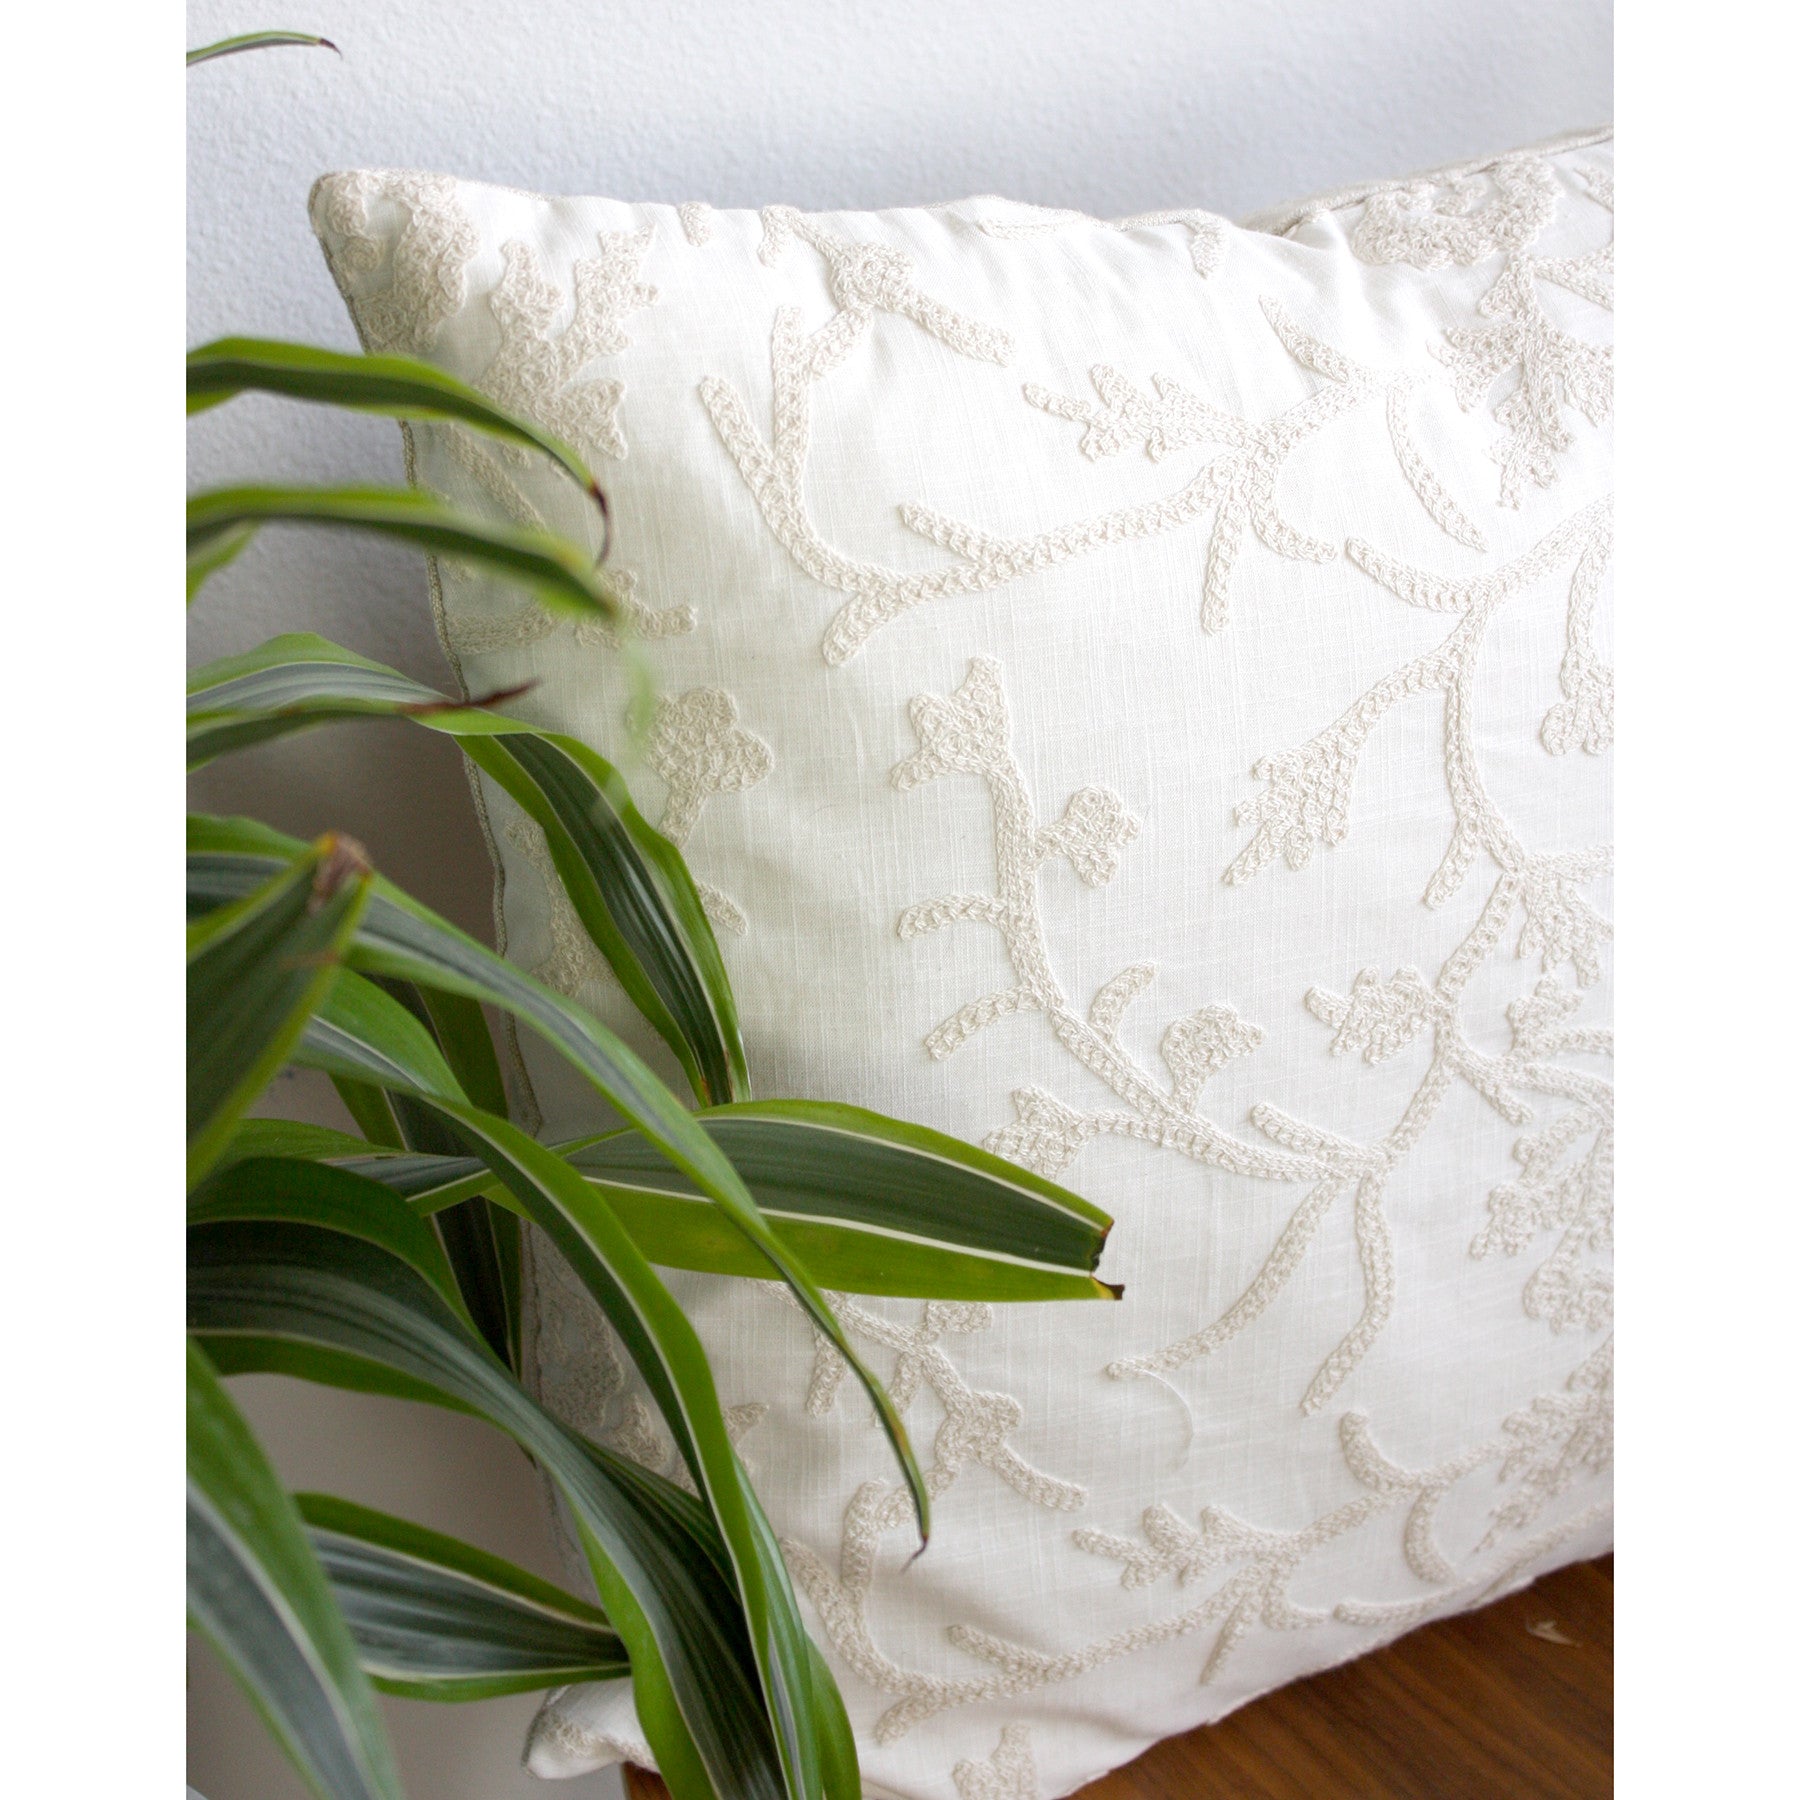 Boho Crewel Embroidered Pillow Cream and White